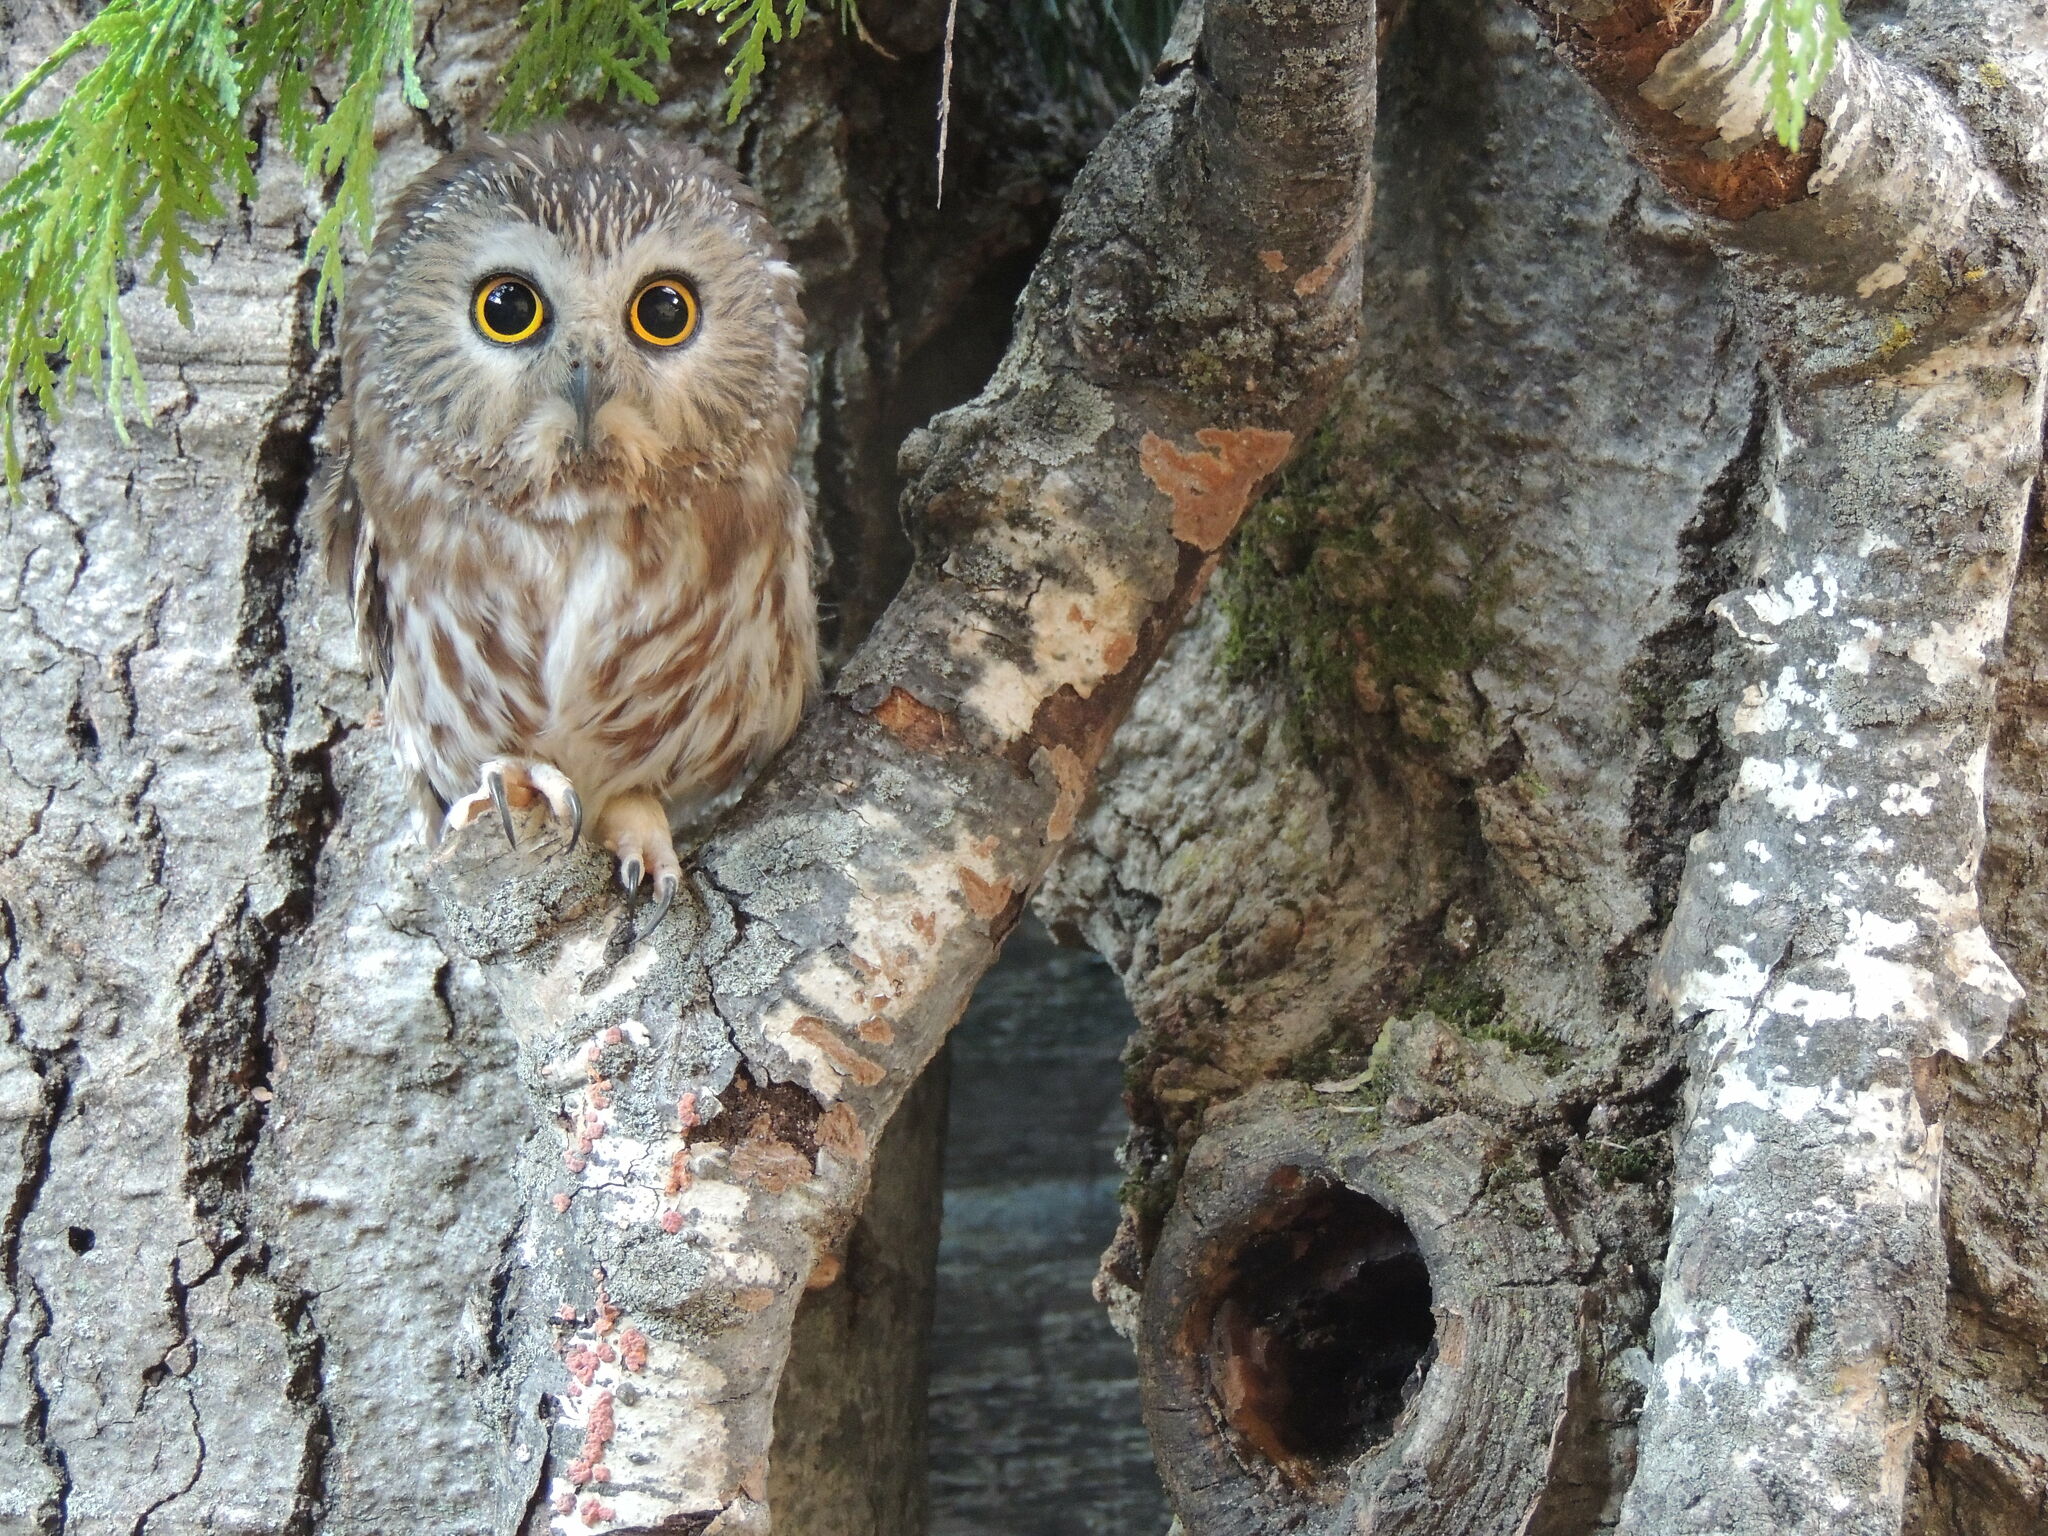 At about 6 inches, northern saw whet owl among smallest owls in world